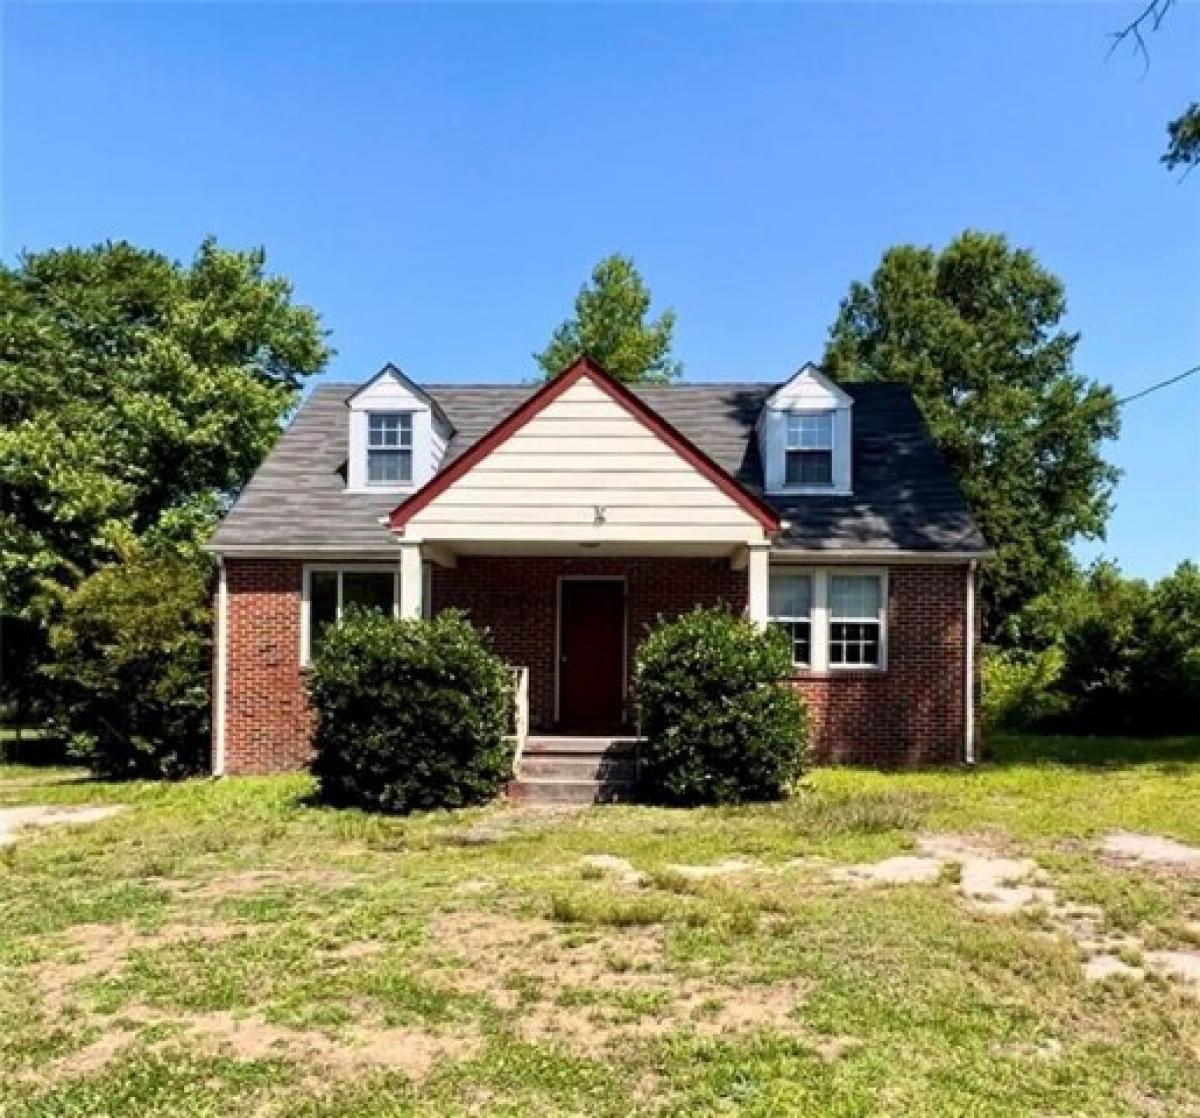 Picture of Home For Sale in Petersburg, Virginia, United States